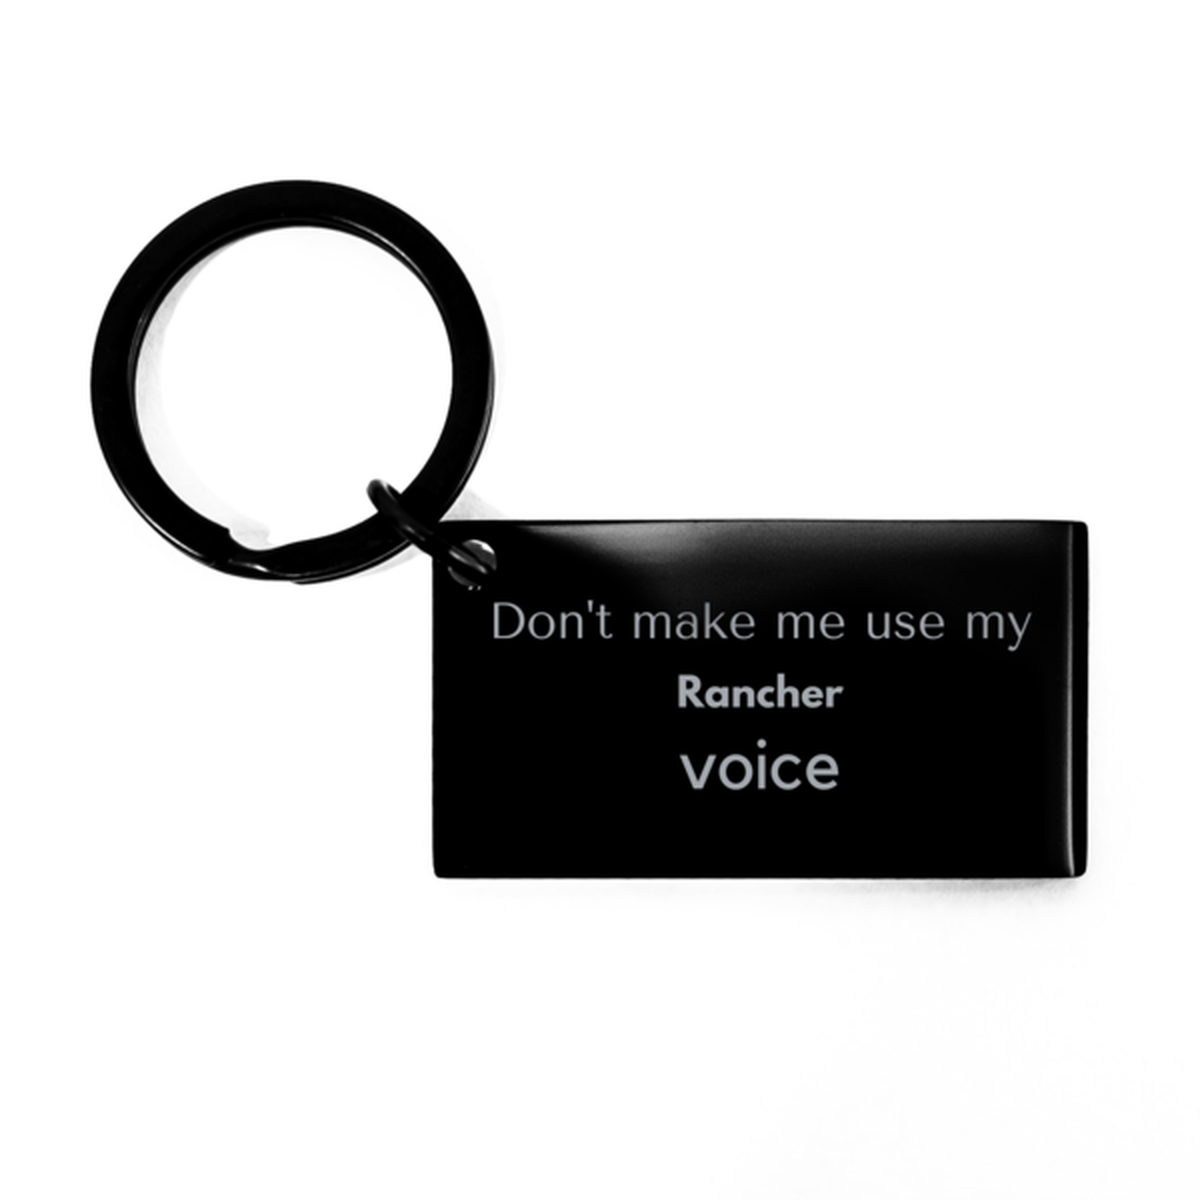 Don't make me use my Rancher voice, Sarcasm Rancher Gifts, Christmas Rancher Keychain Birthday Unique Gifts For Rancher Coworkers, Men, Women, Colleague, Friends